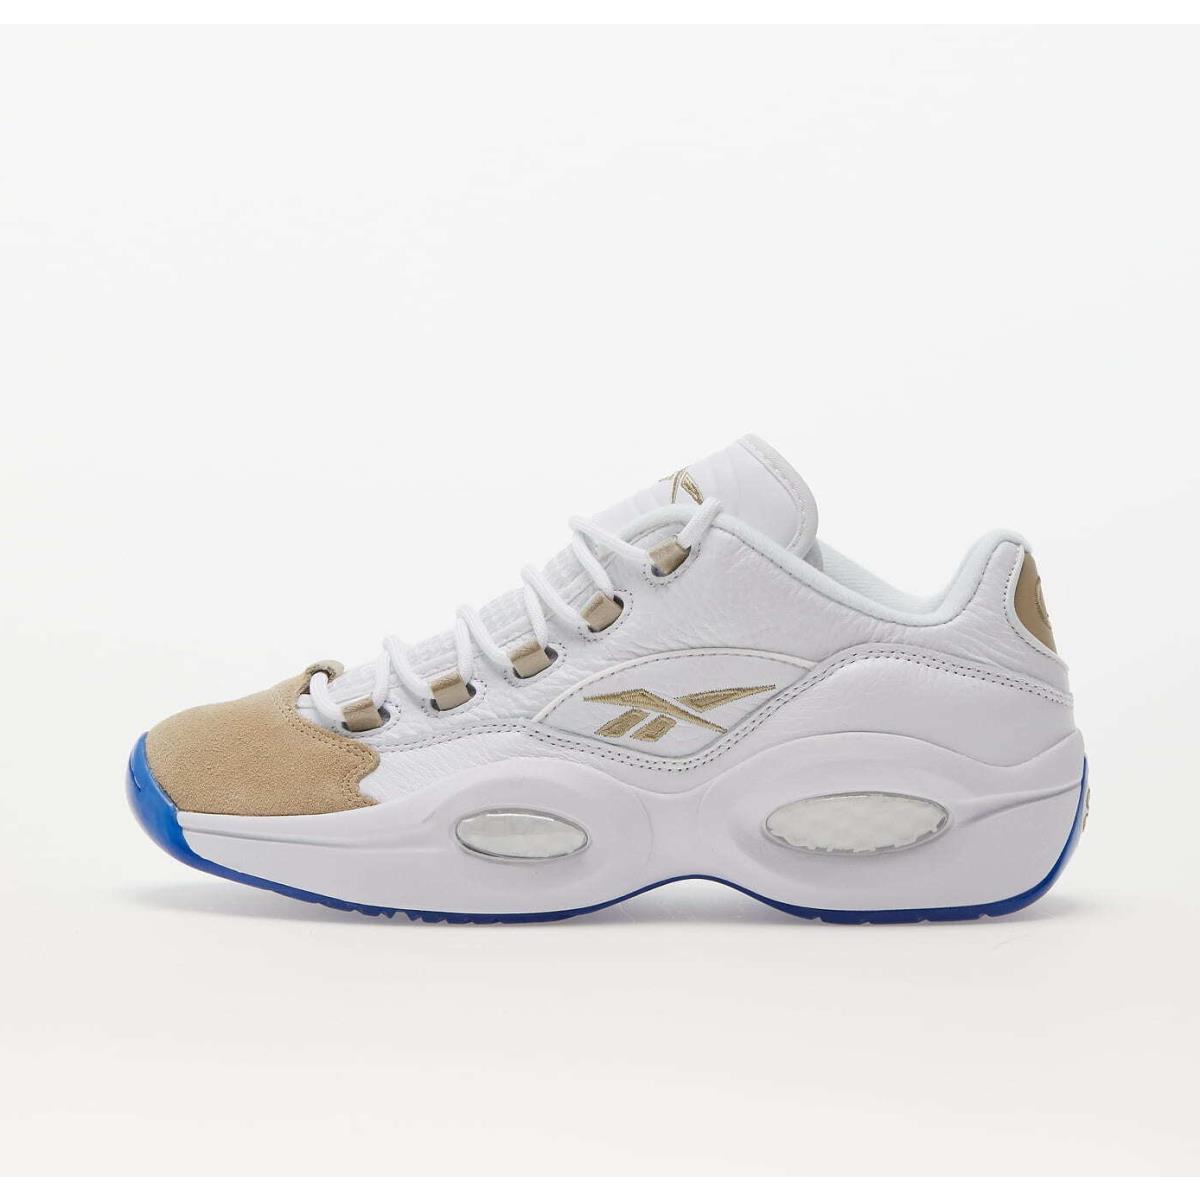 Reebok shoes Question Low - White/ White/ Light Sand 0